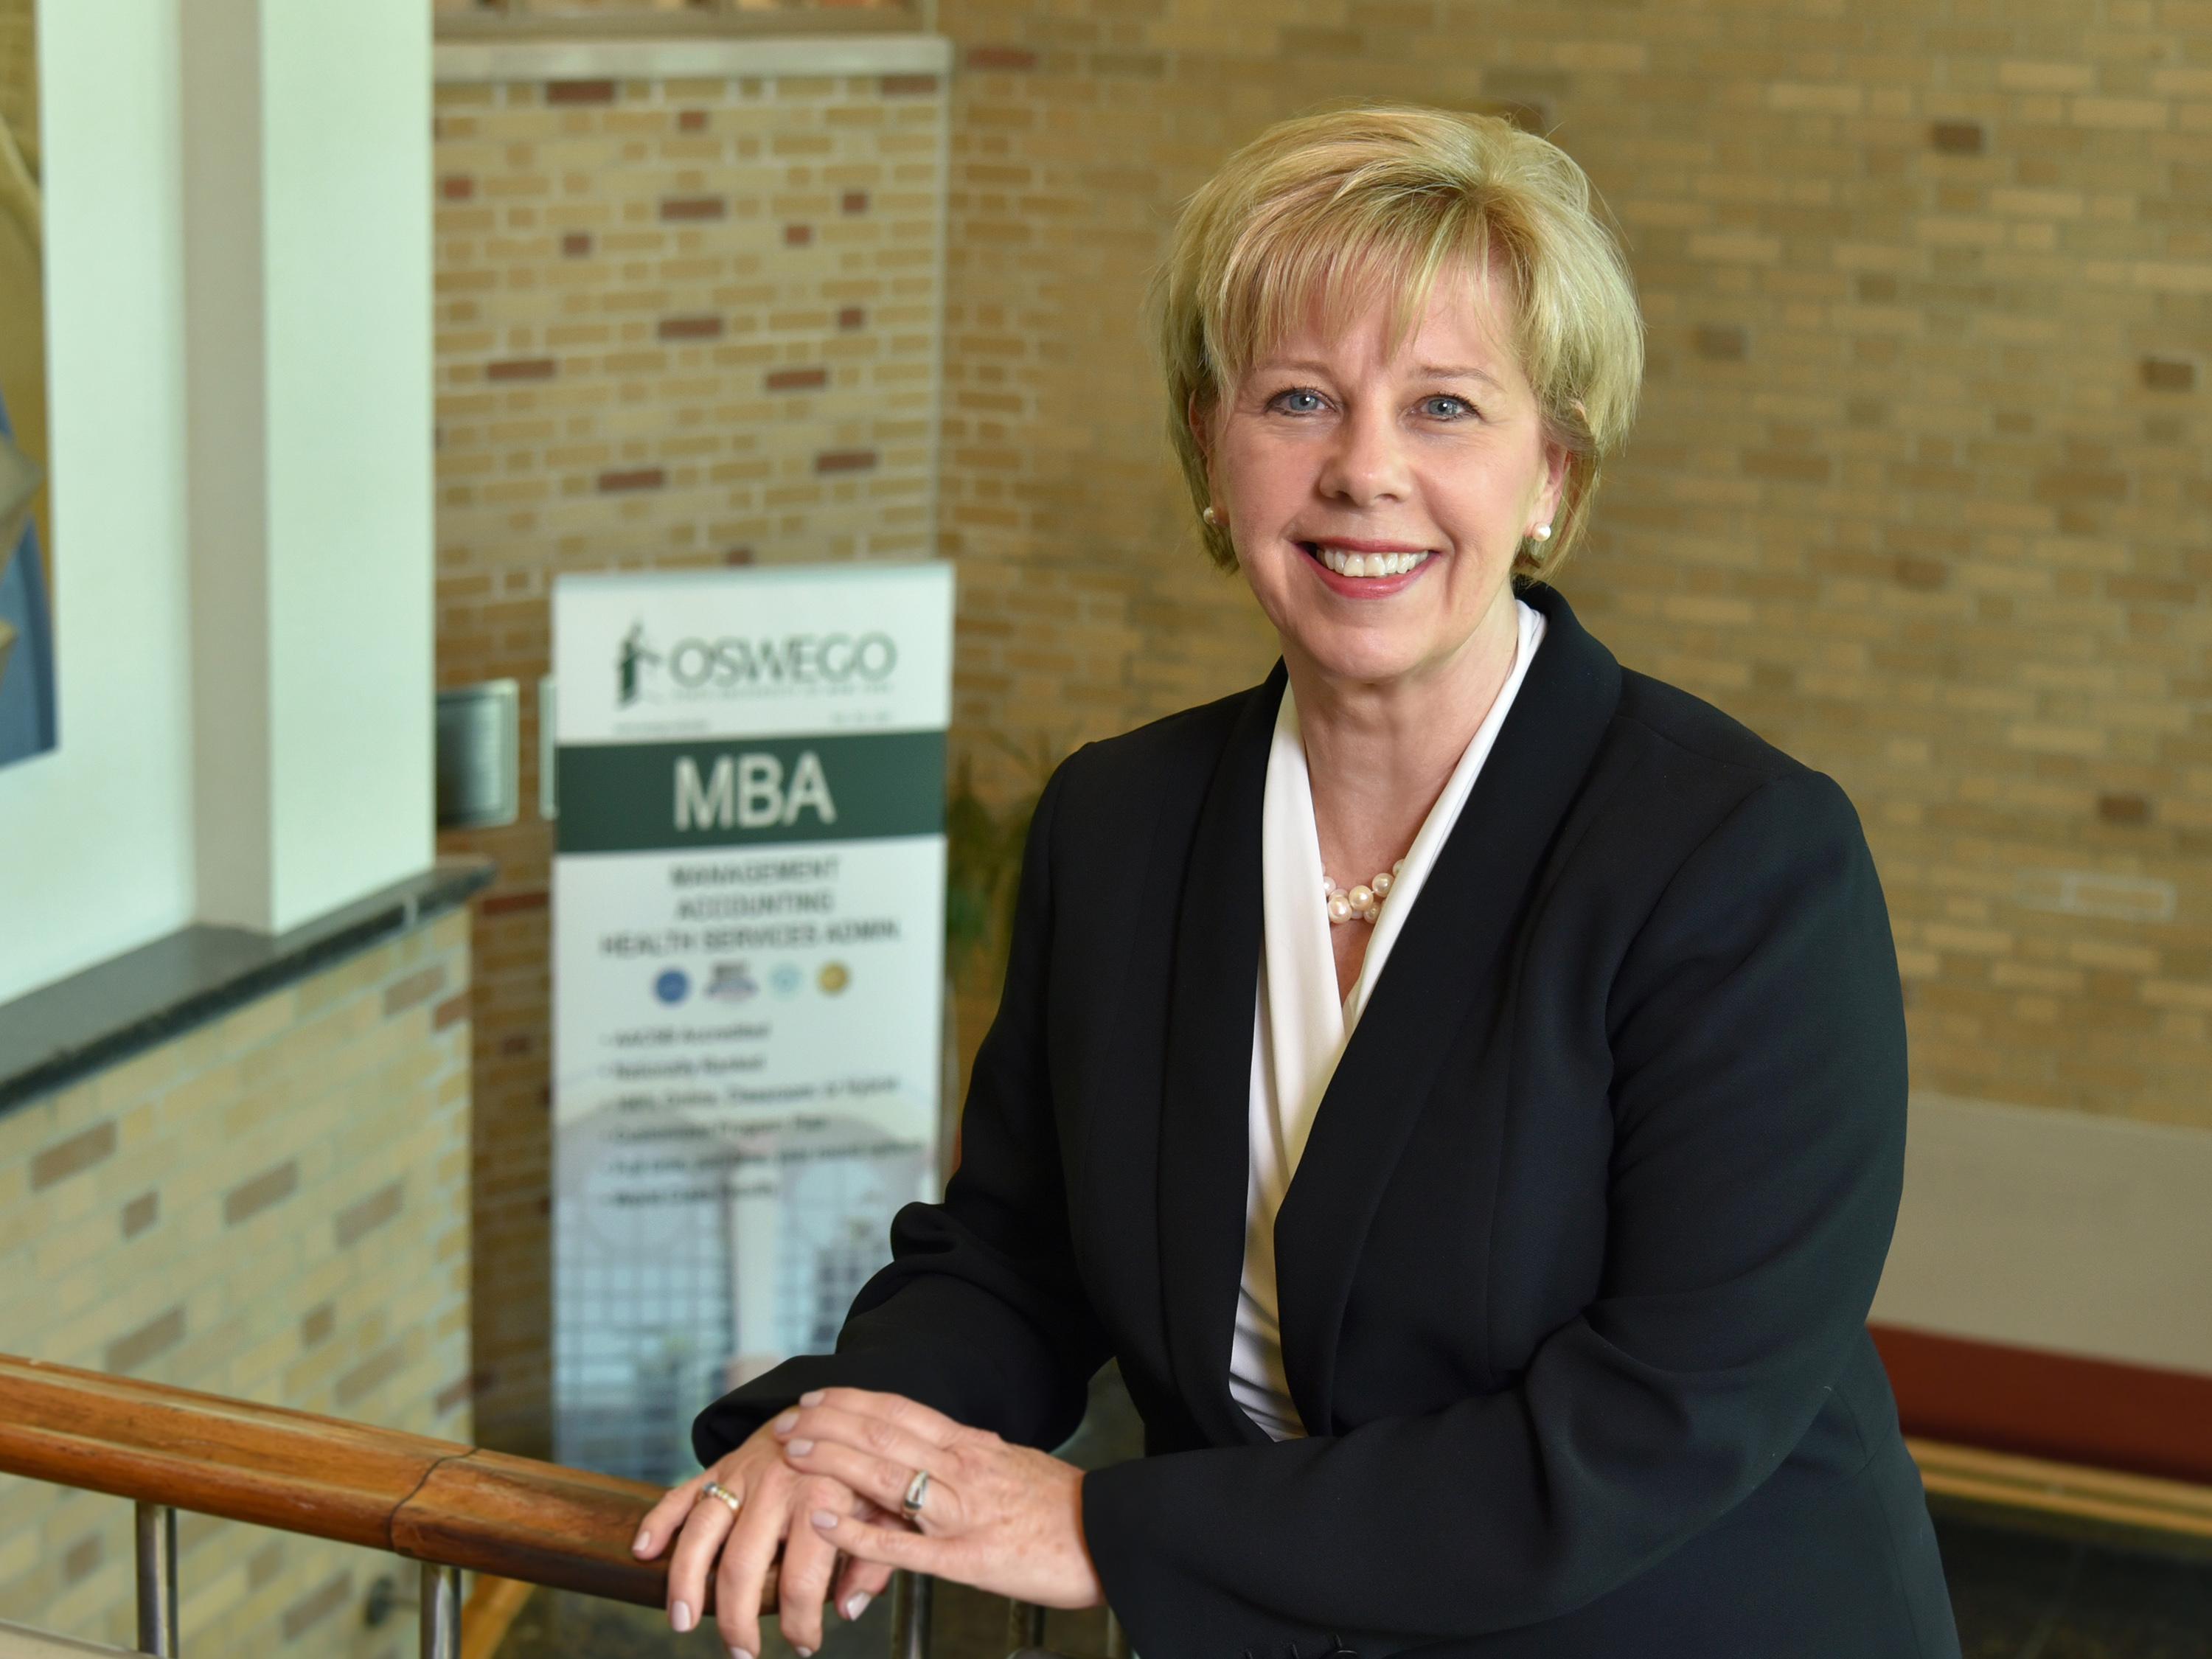 Irene Scruton, winner of a SUNY Chancellor’s Award for Excellence in Professional Service